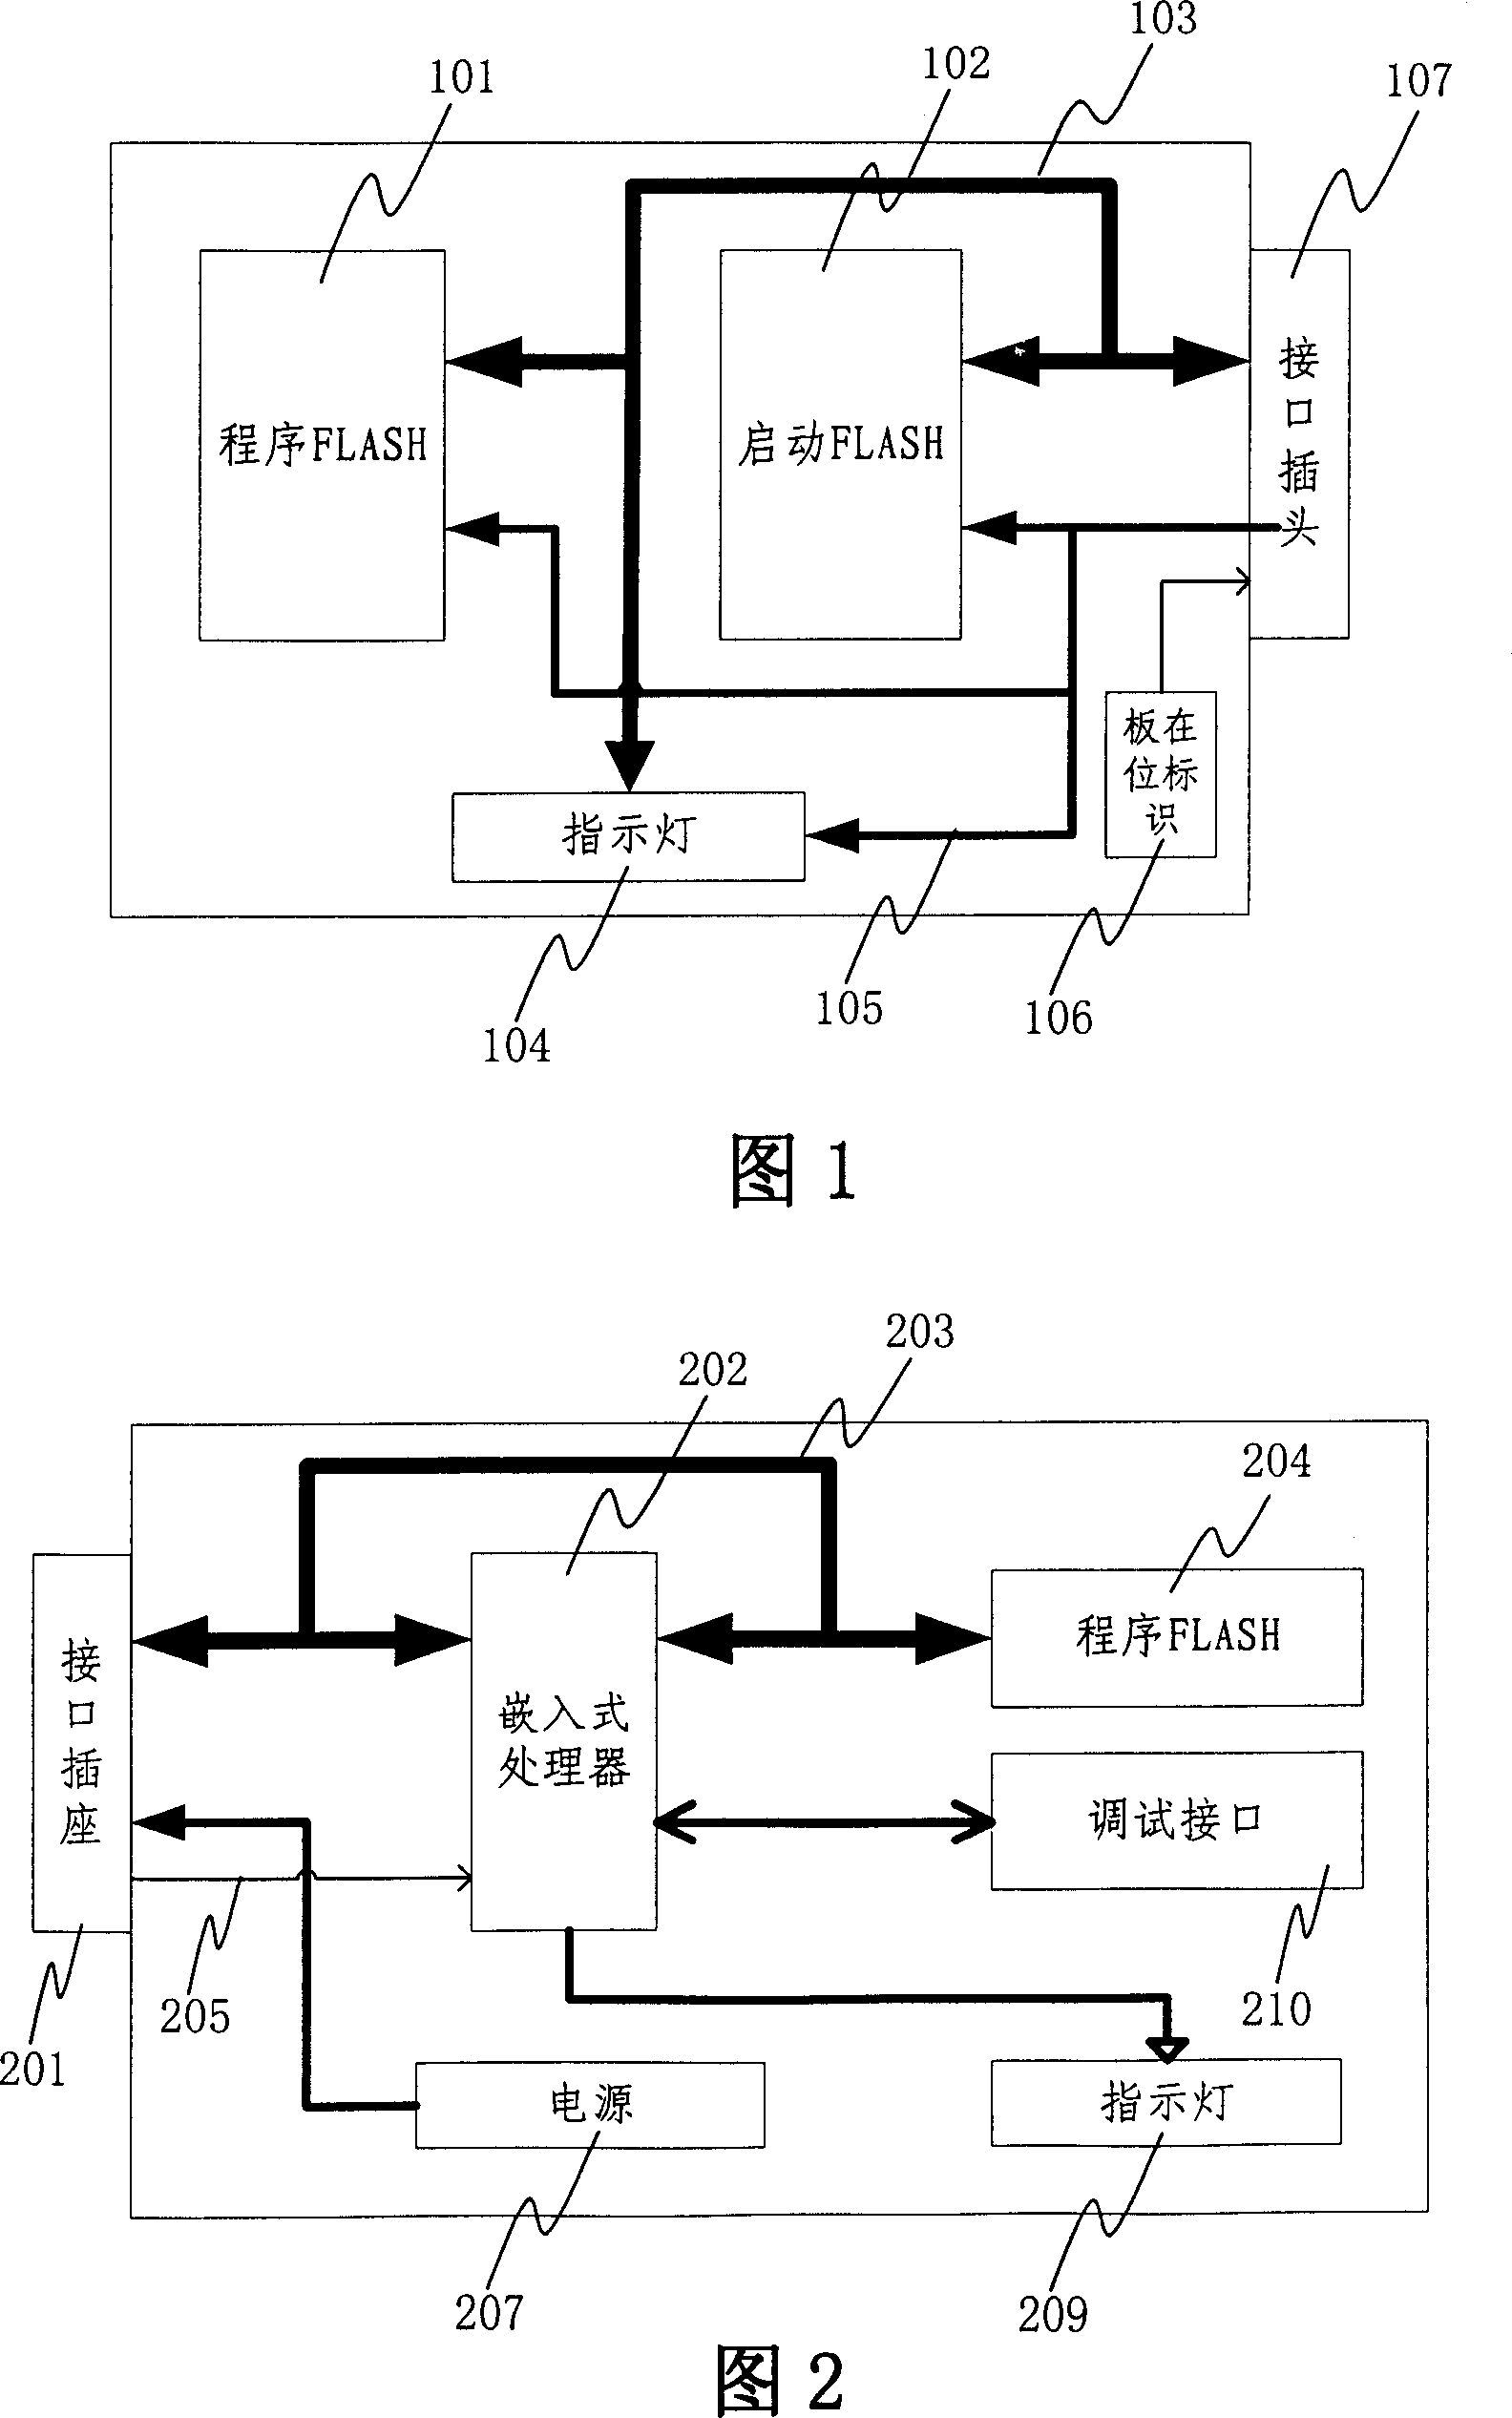 Single board software downloading method and apparatus